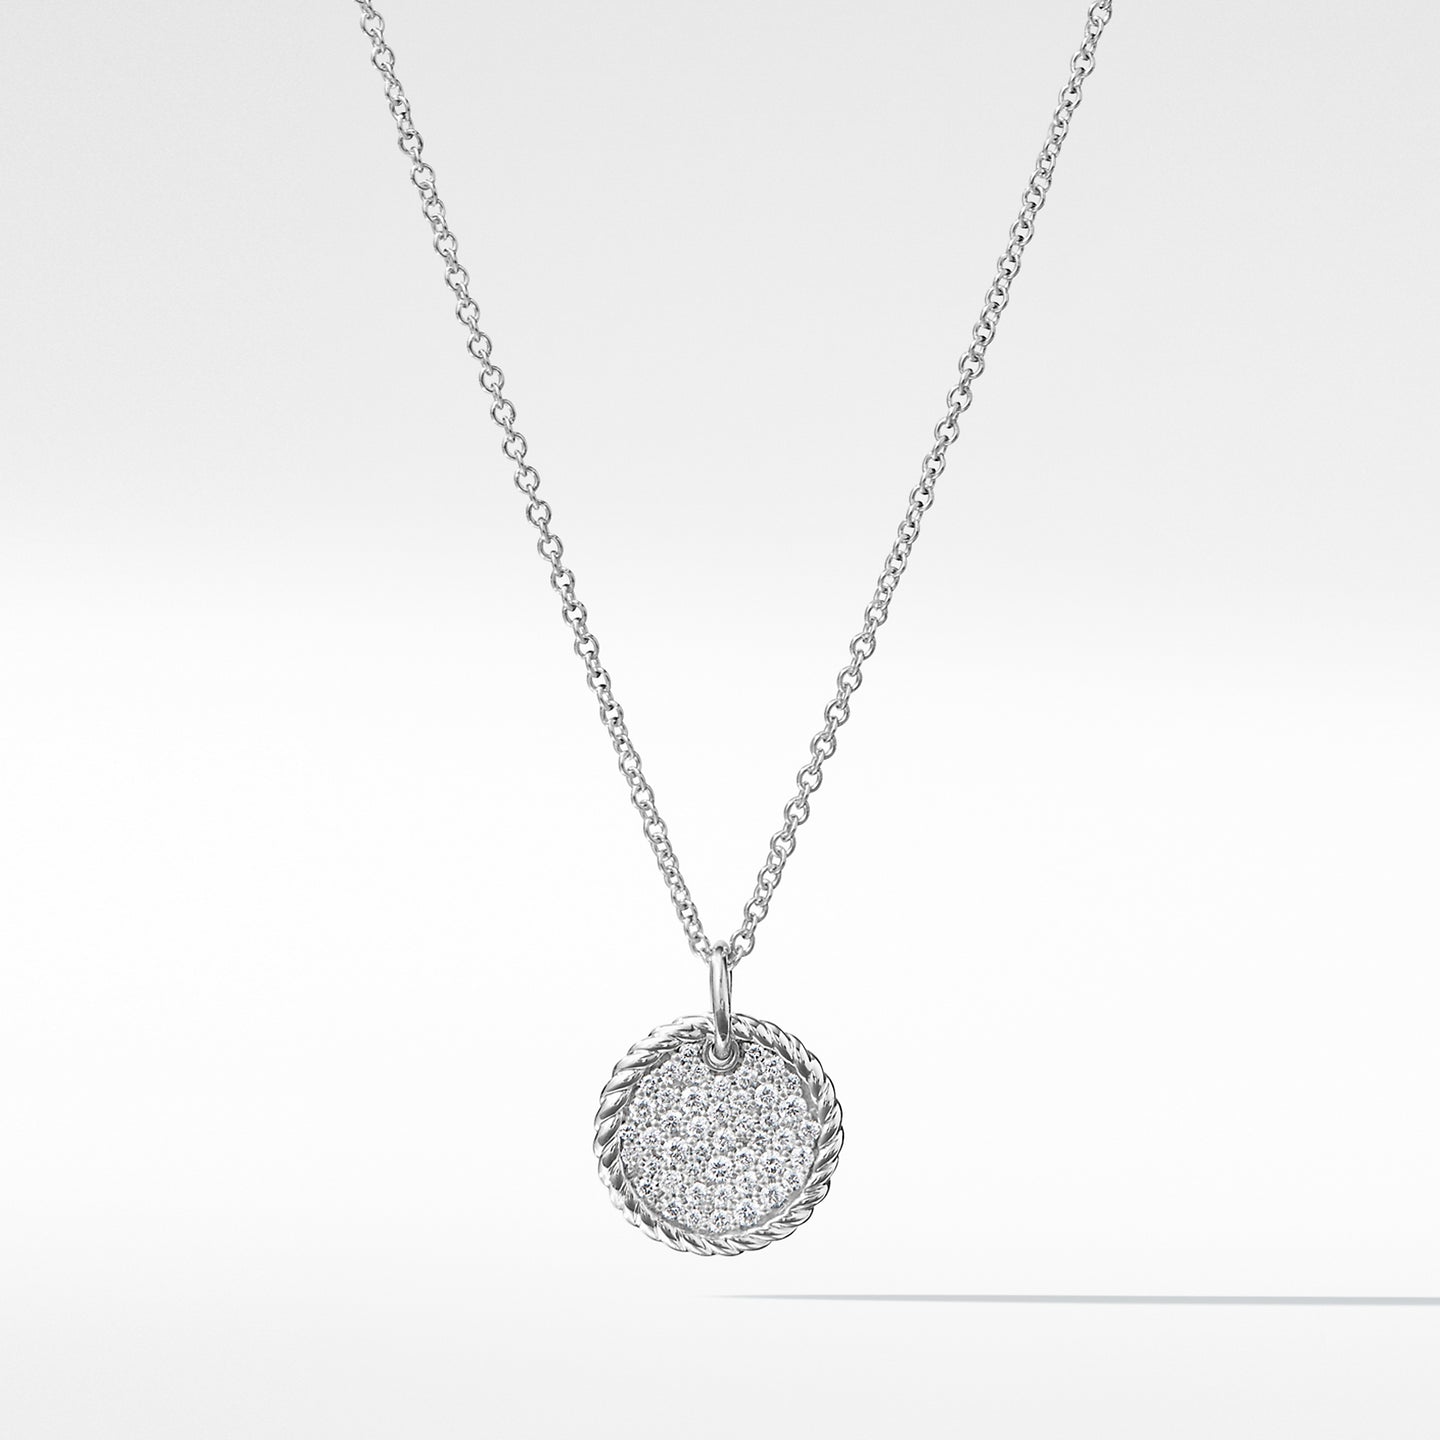 Cable Collectibles® Pavé Plate Necklace with Diamonds in 18K White Gold, 18